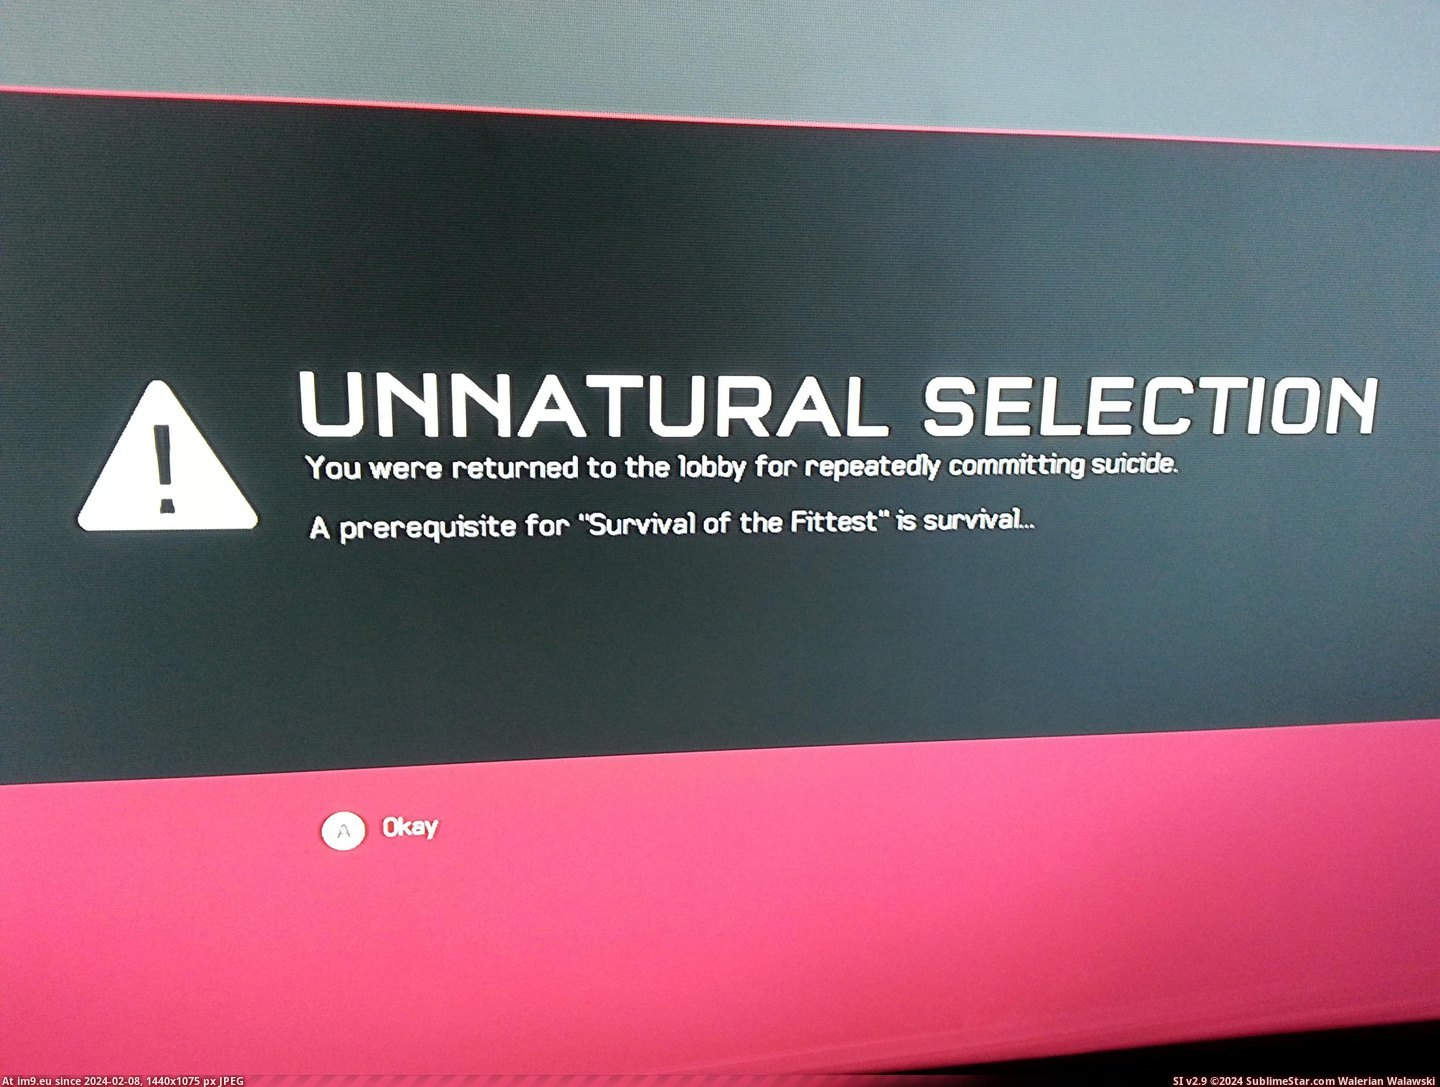 #Gaming #Little #Message #Amusing #Committed #Suicide #Halo [Gaming] Committed suicide 3 times in Halo 5 and got this amusing little message Pic. (Bild von album My r/GAMING favs))